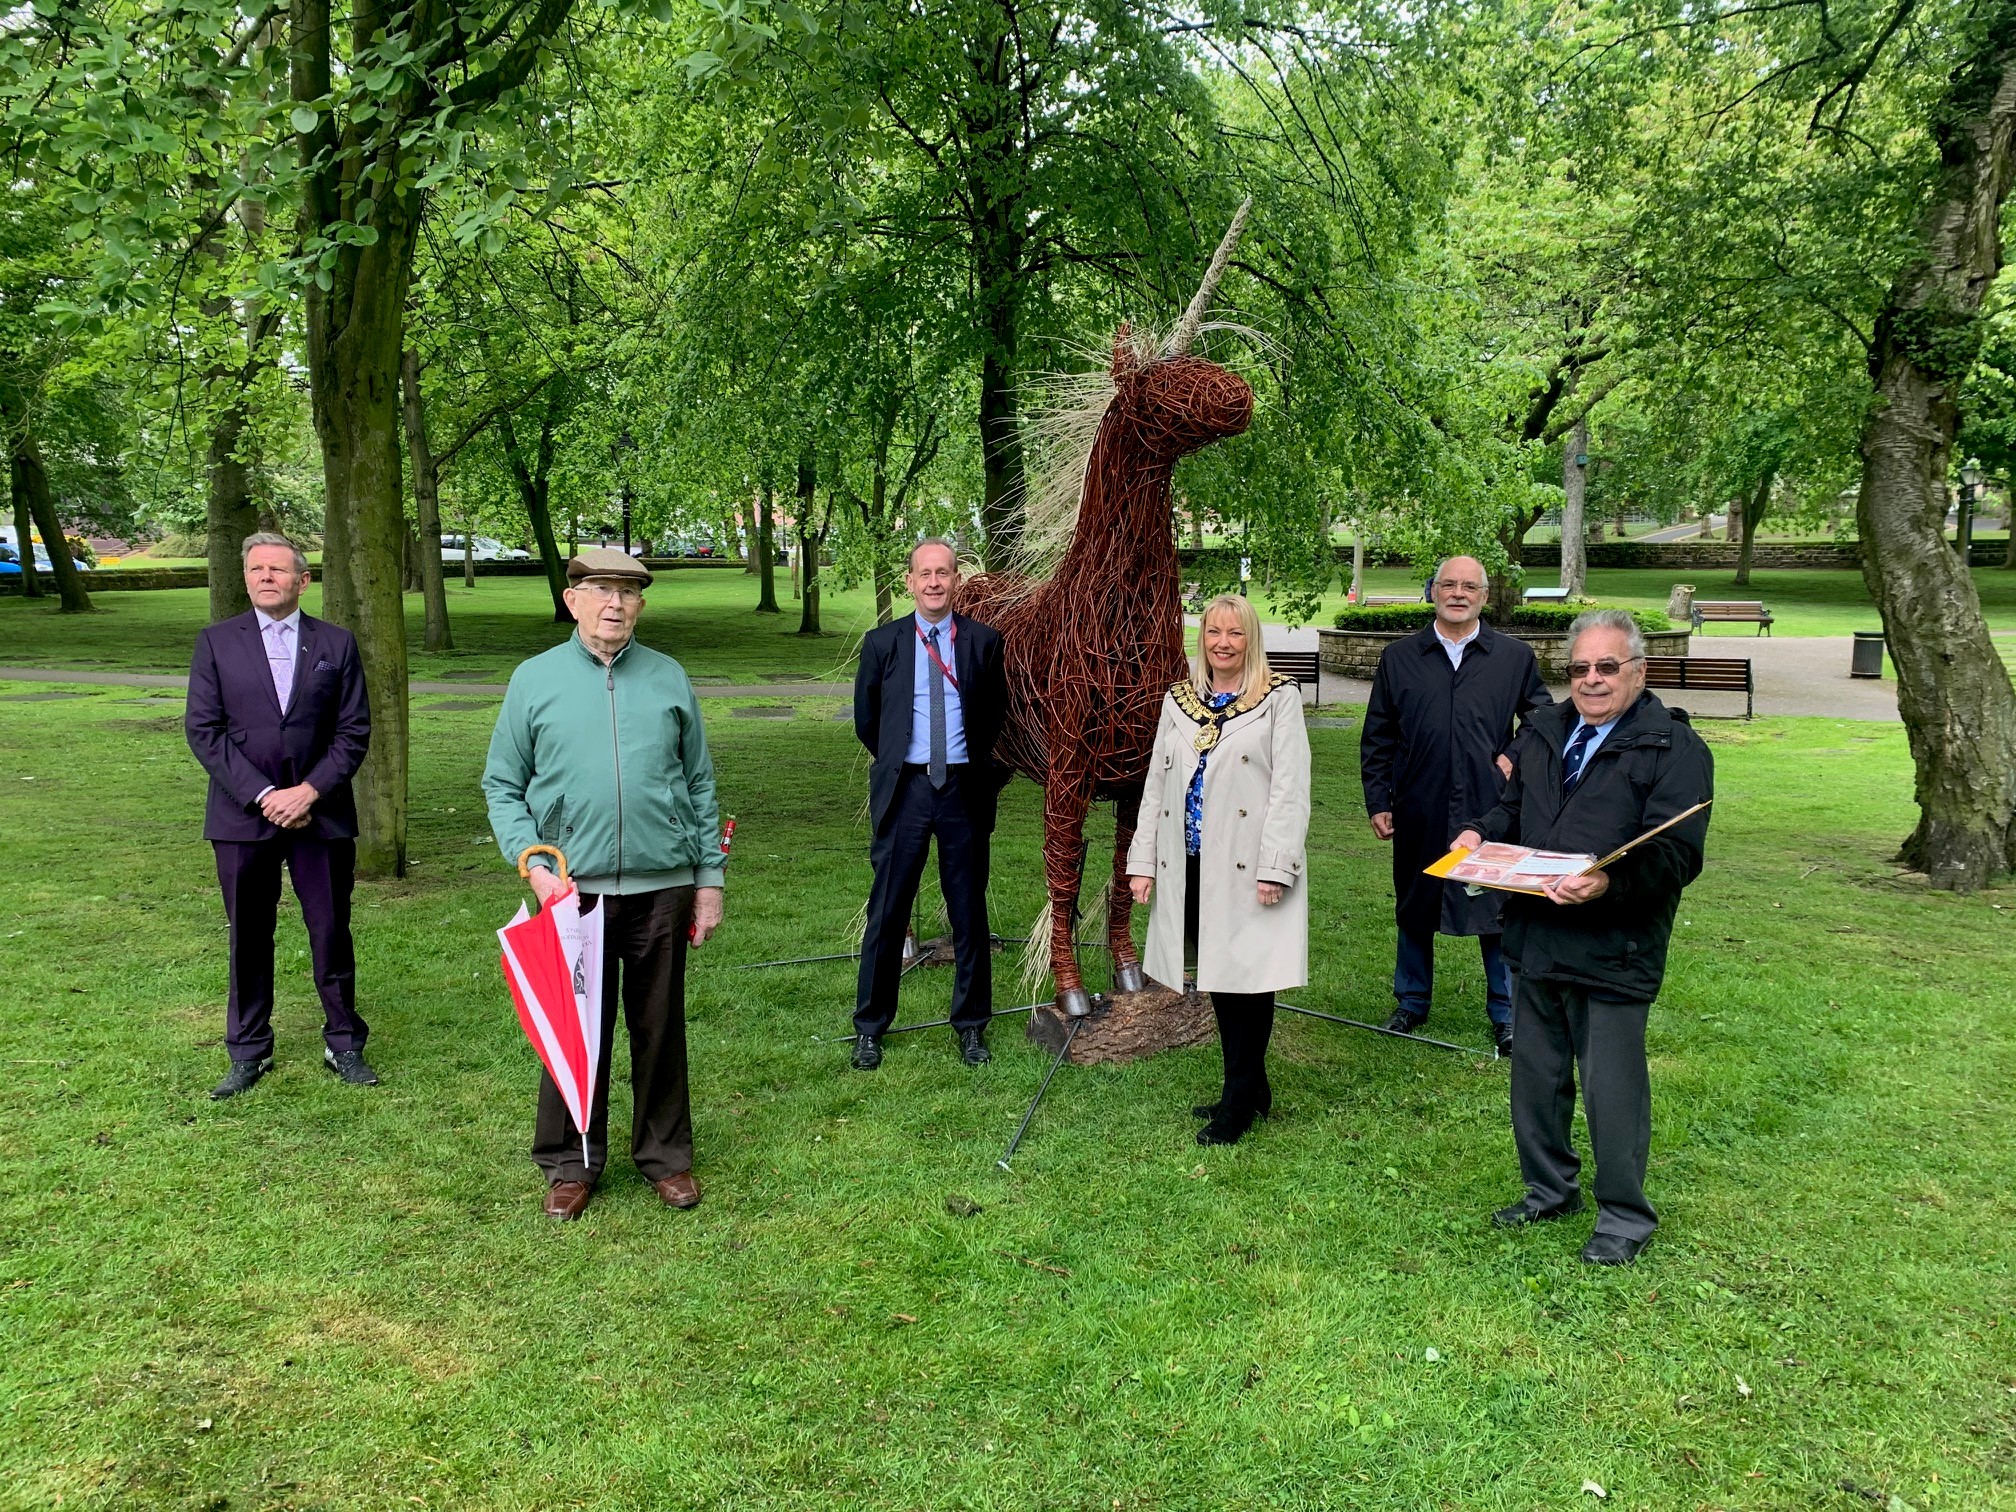 Twin town anniversary unicorn with the Major and Councillors